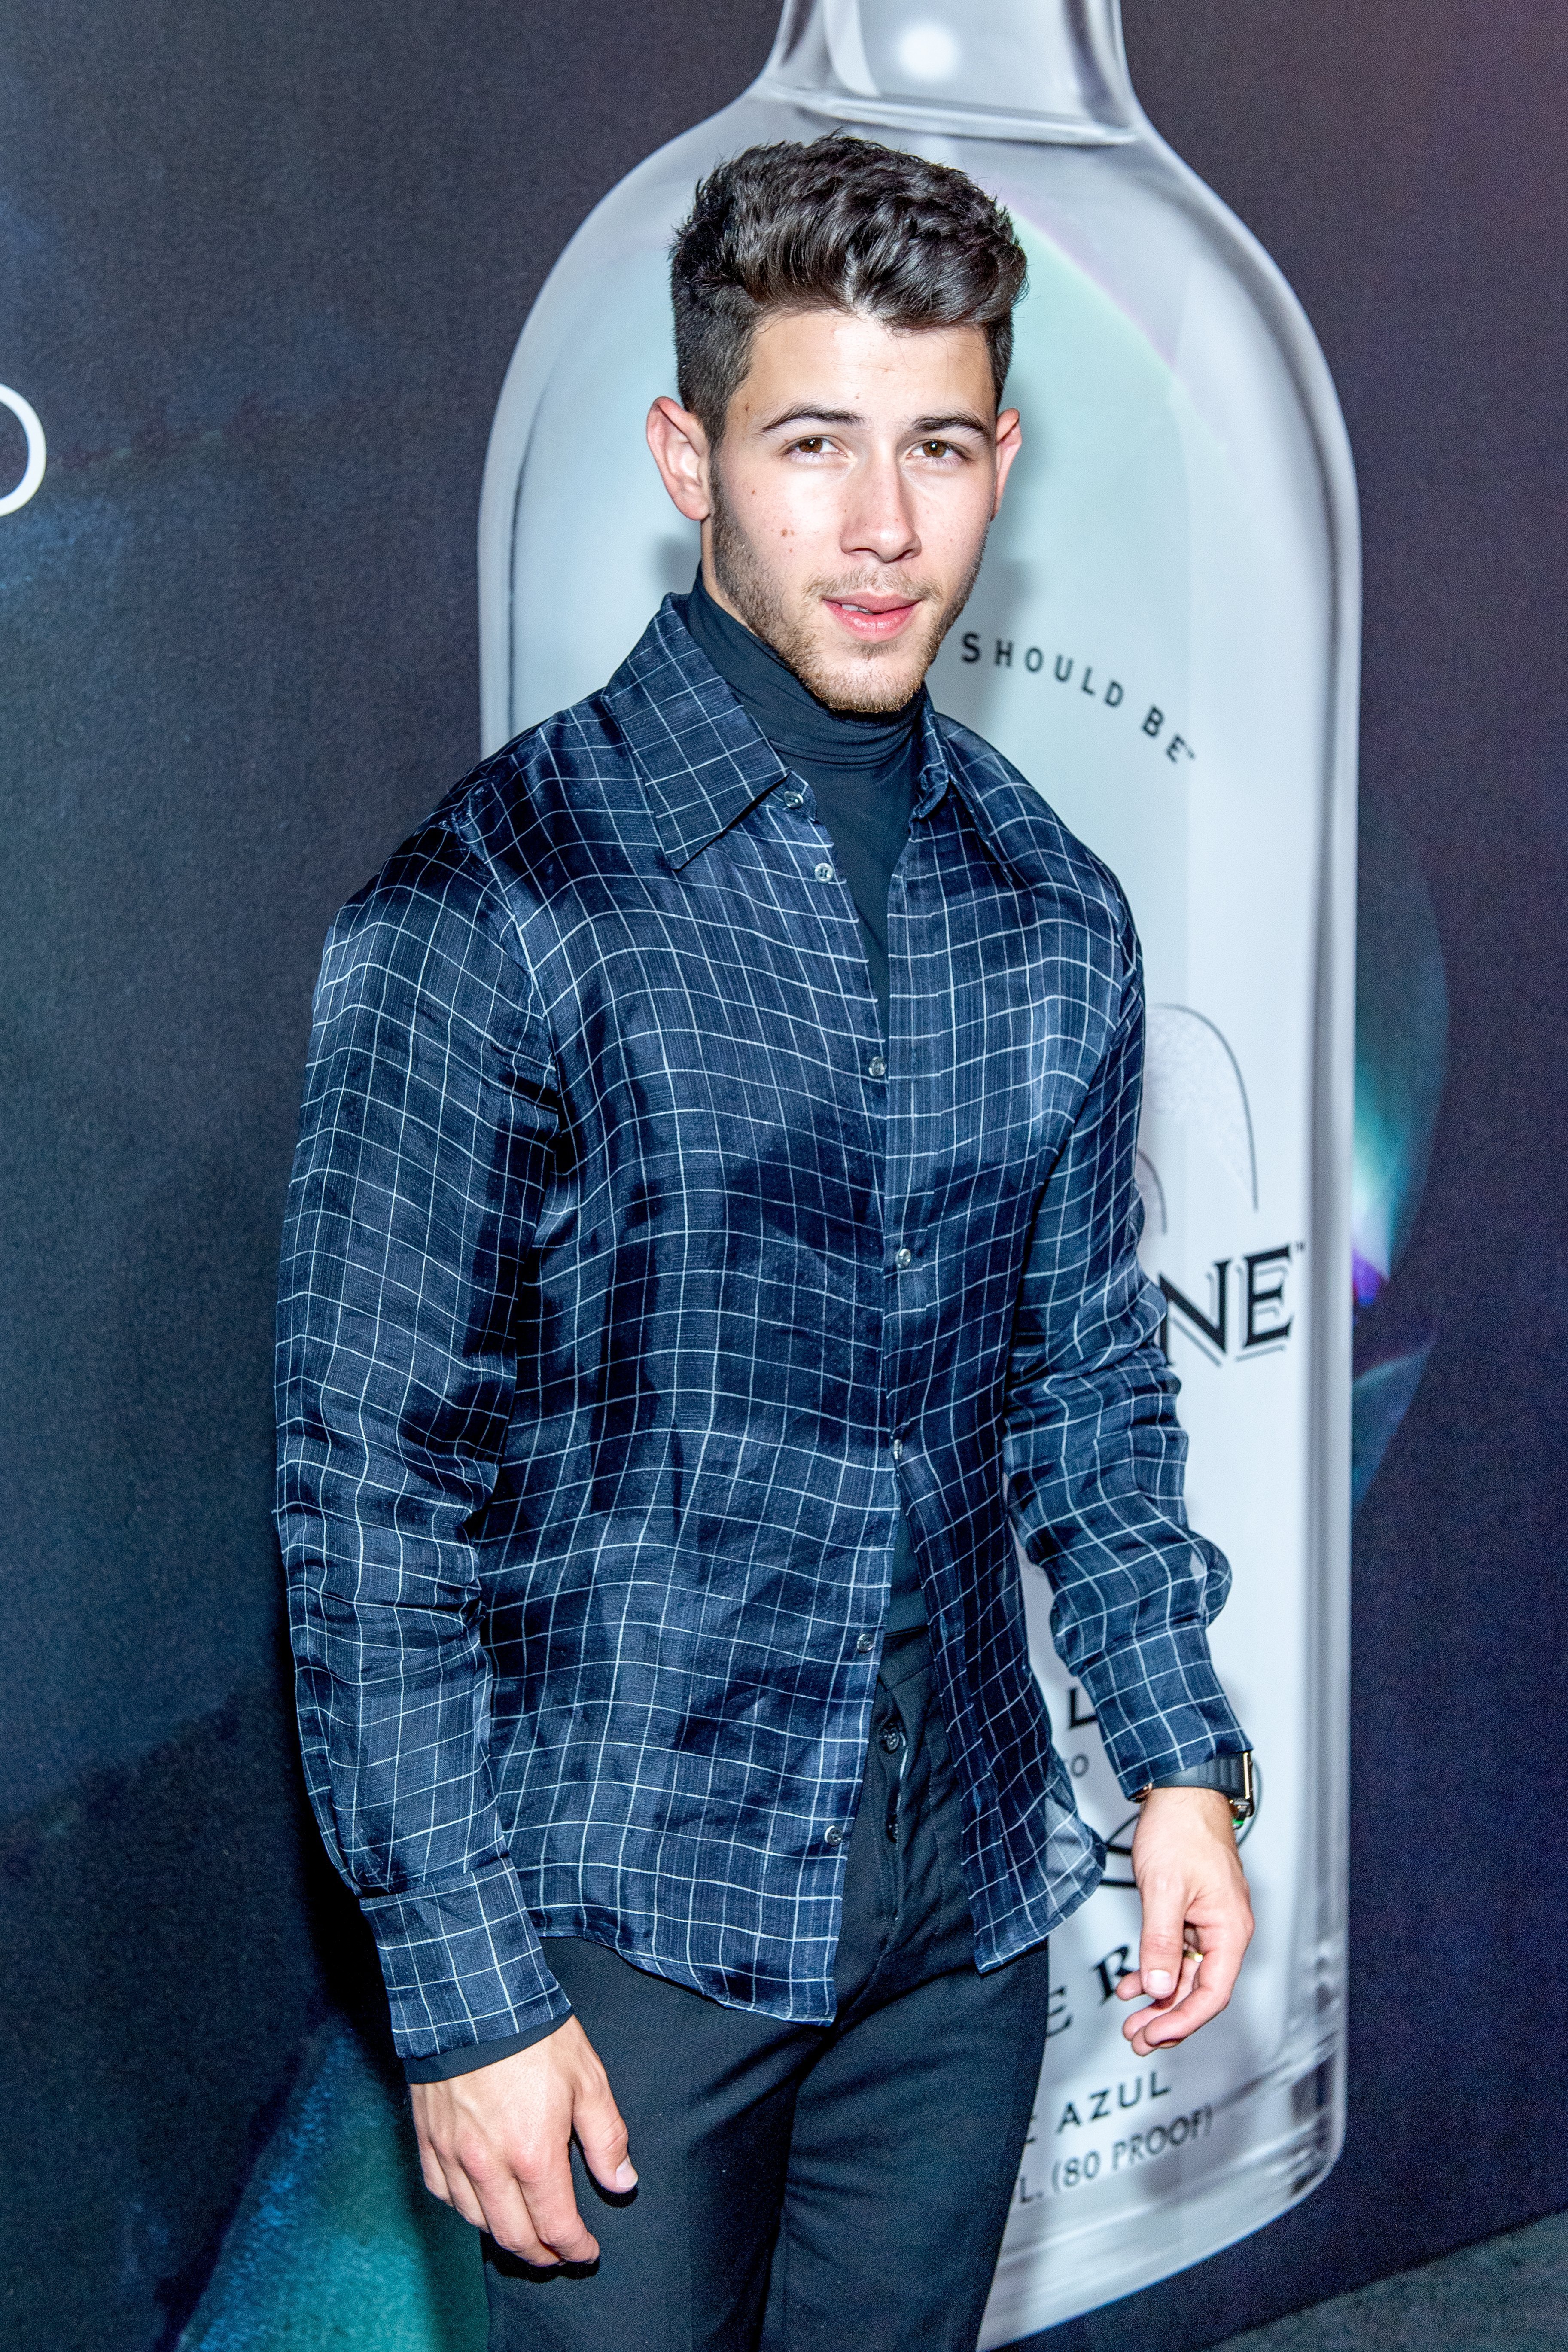 Nick Jonas attends the launch of his Villa One Tequila Line in New York City on August 29, 2019 | Photo: Getty Images